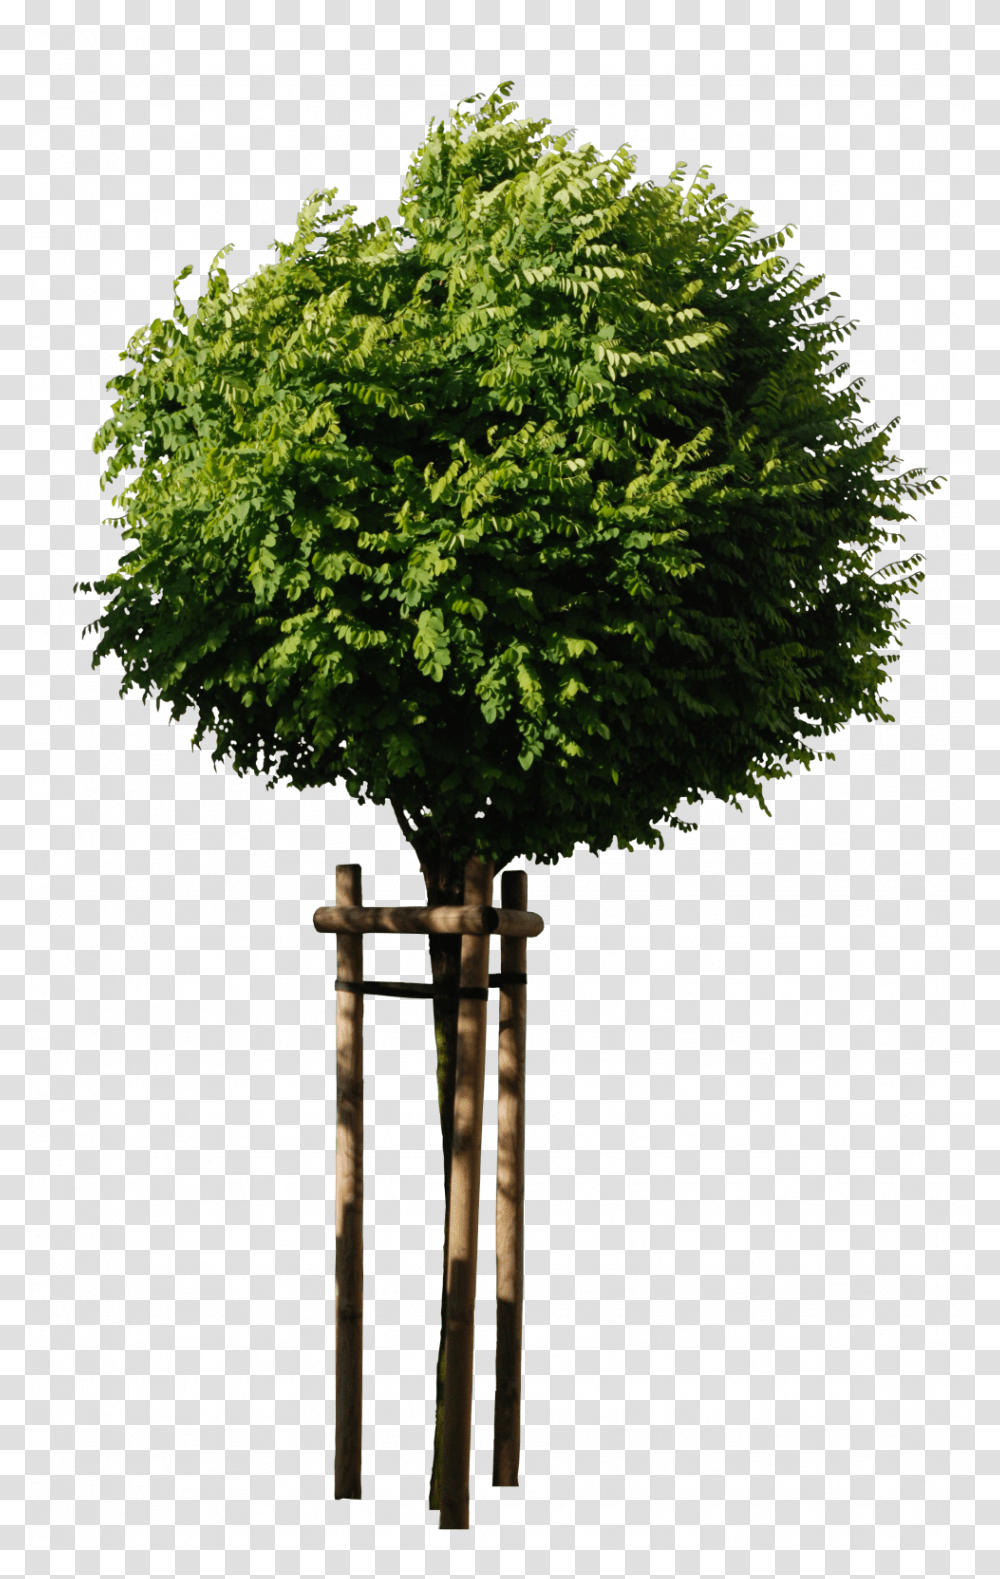 MTitle Free Download Trees0014 MData Trees With No Background, Plant, Conifer, Bush, Vegetation Transparent Png